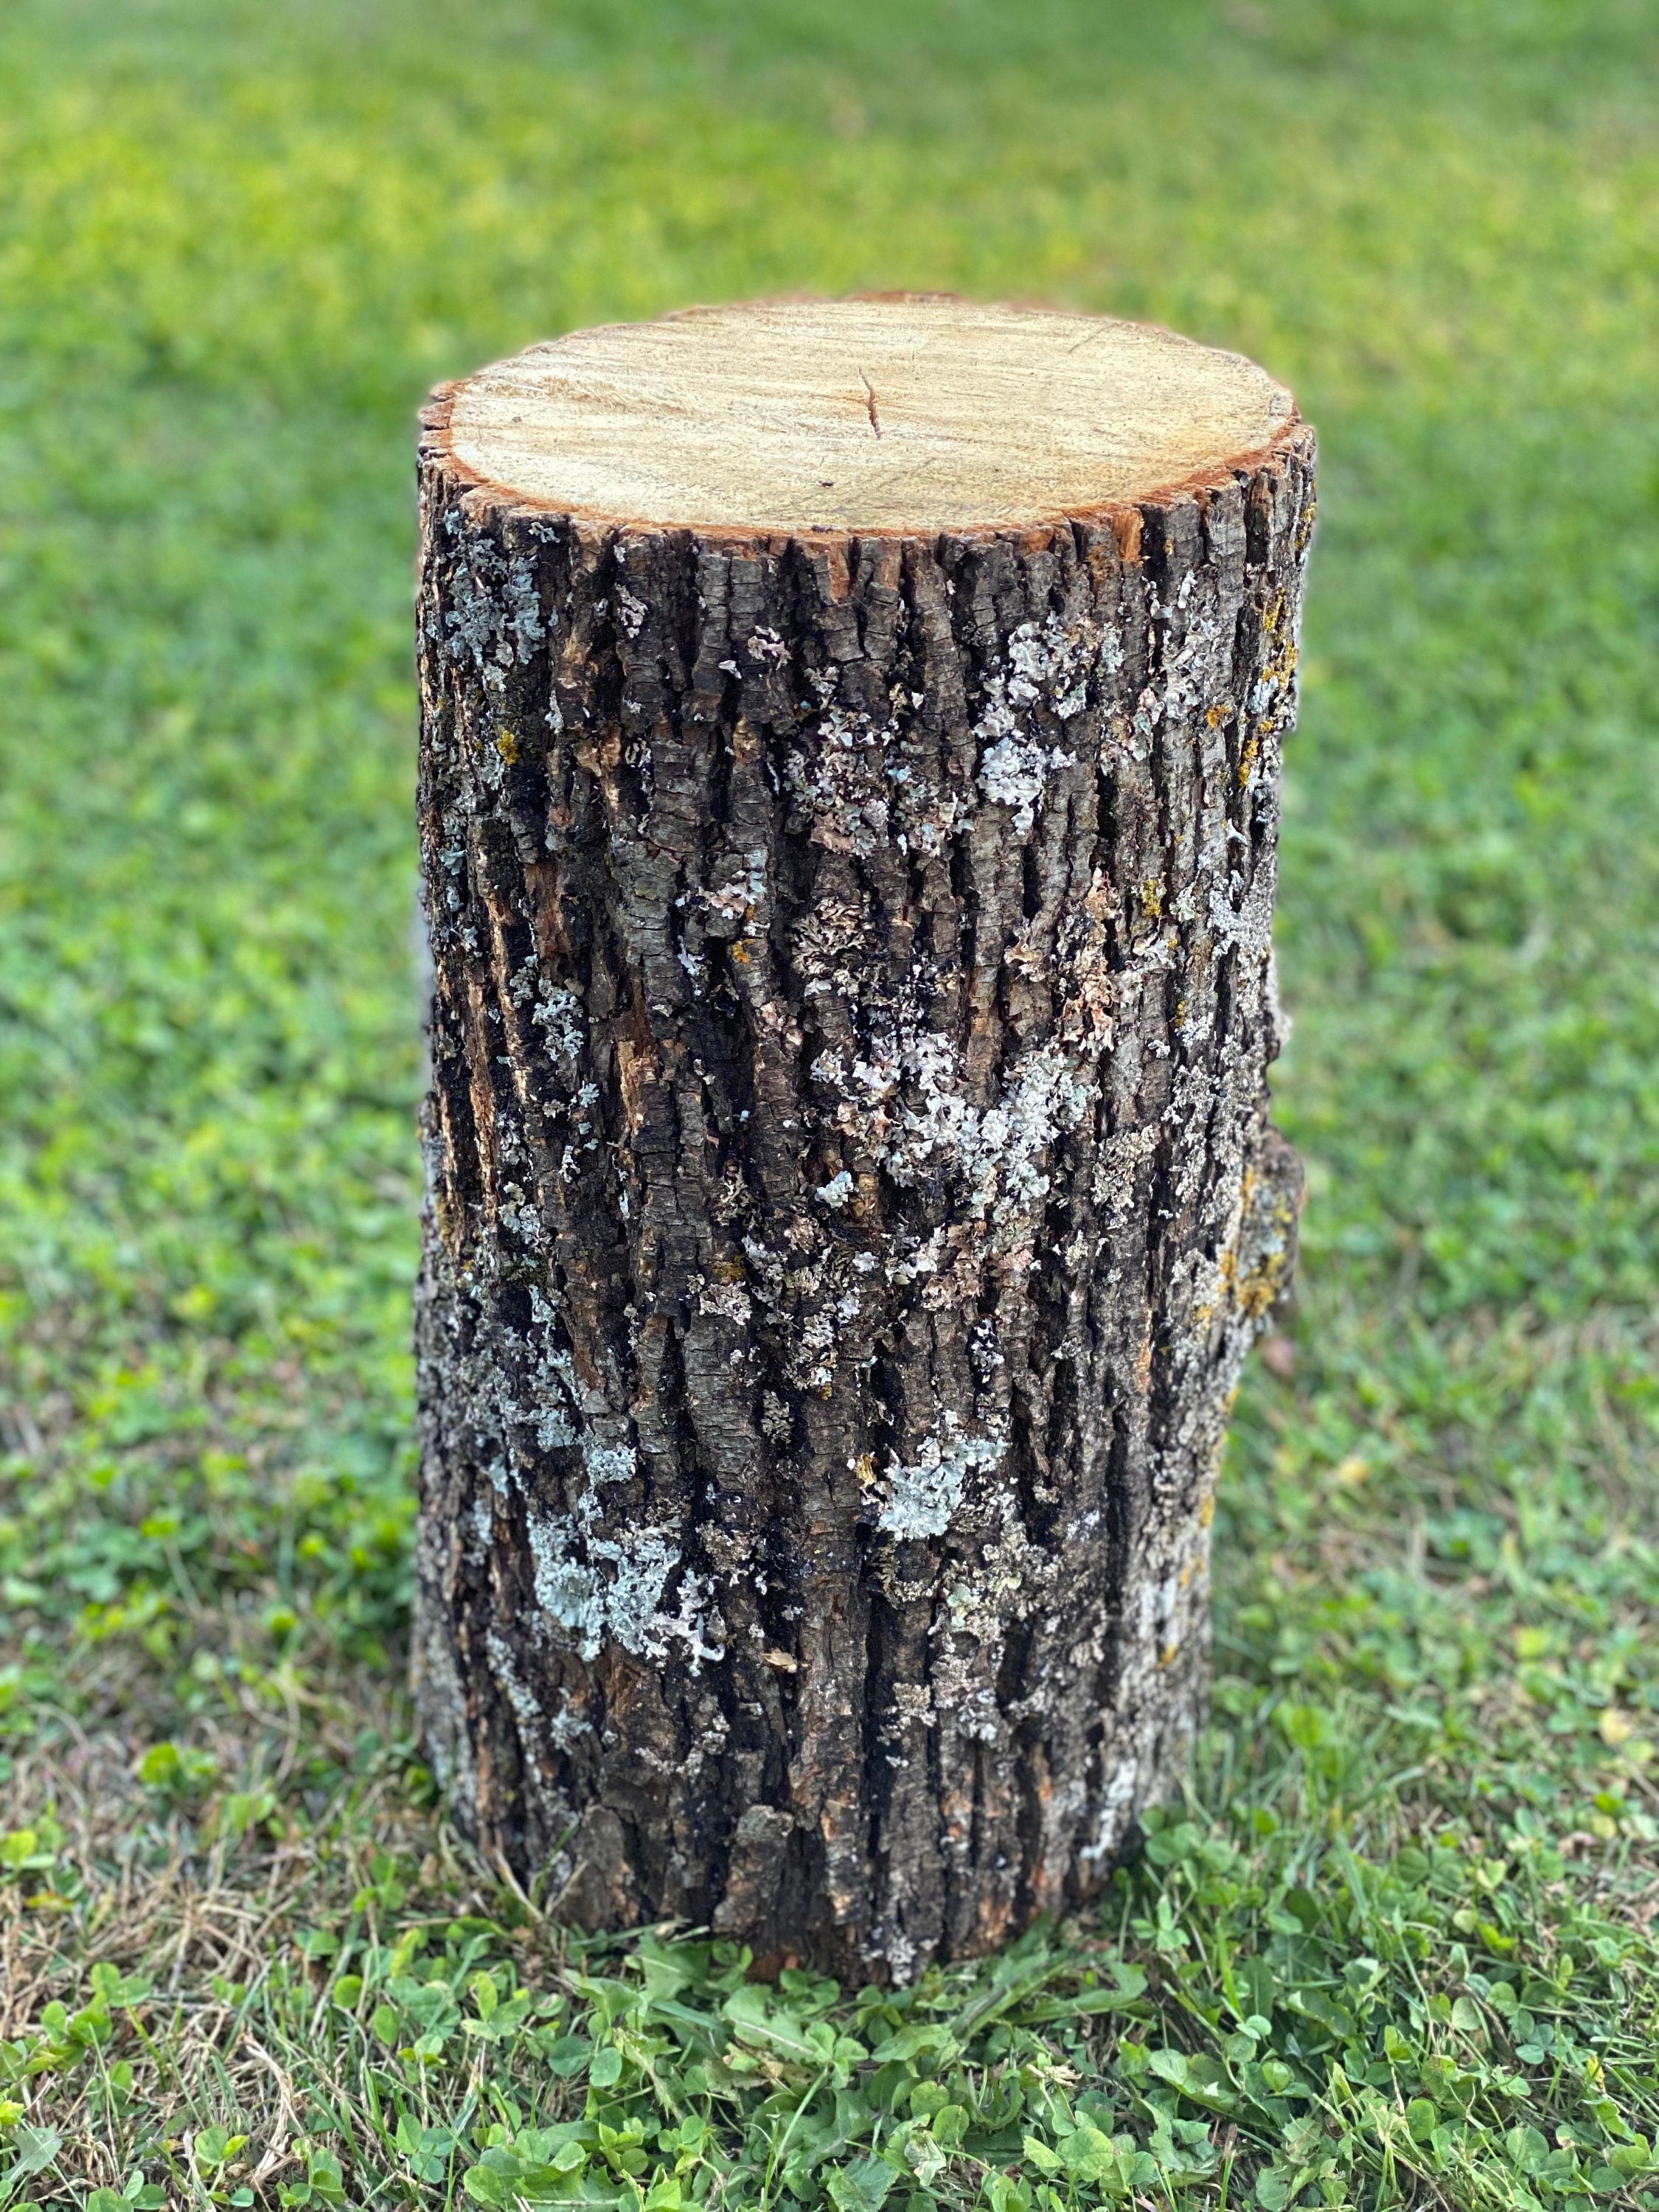 Basswood Log, One Count, About 12 Inches Long by 8 Inches Diameter